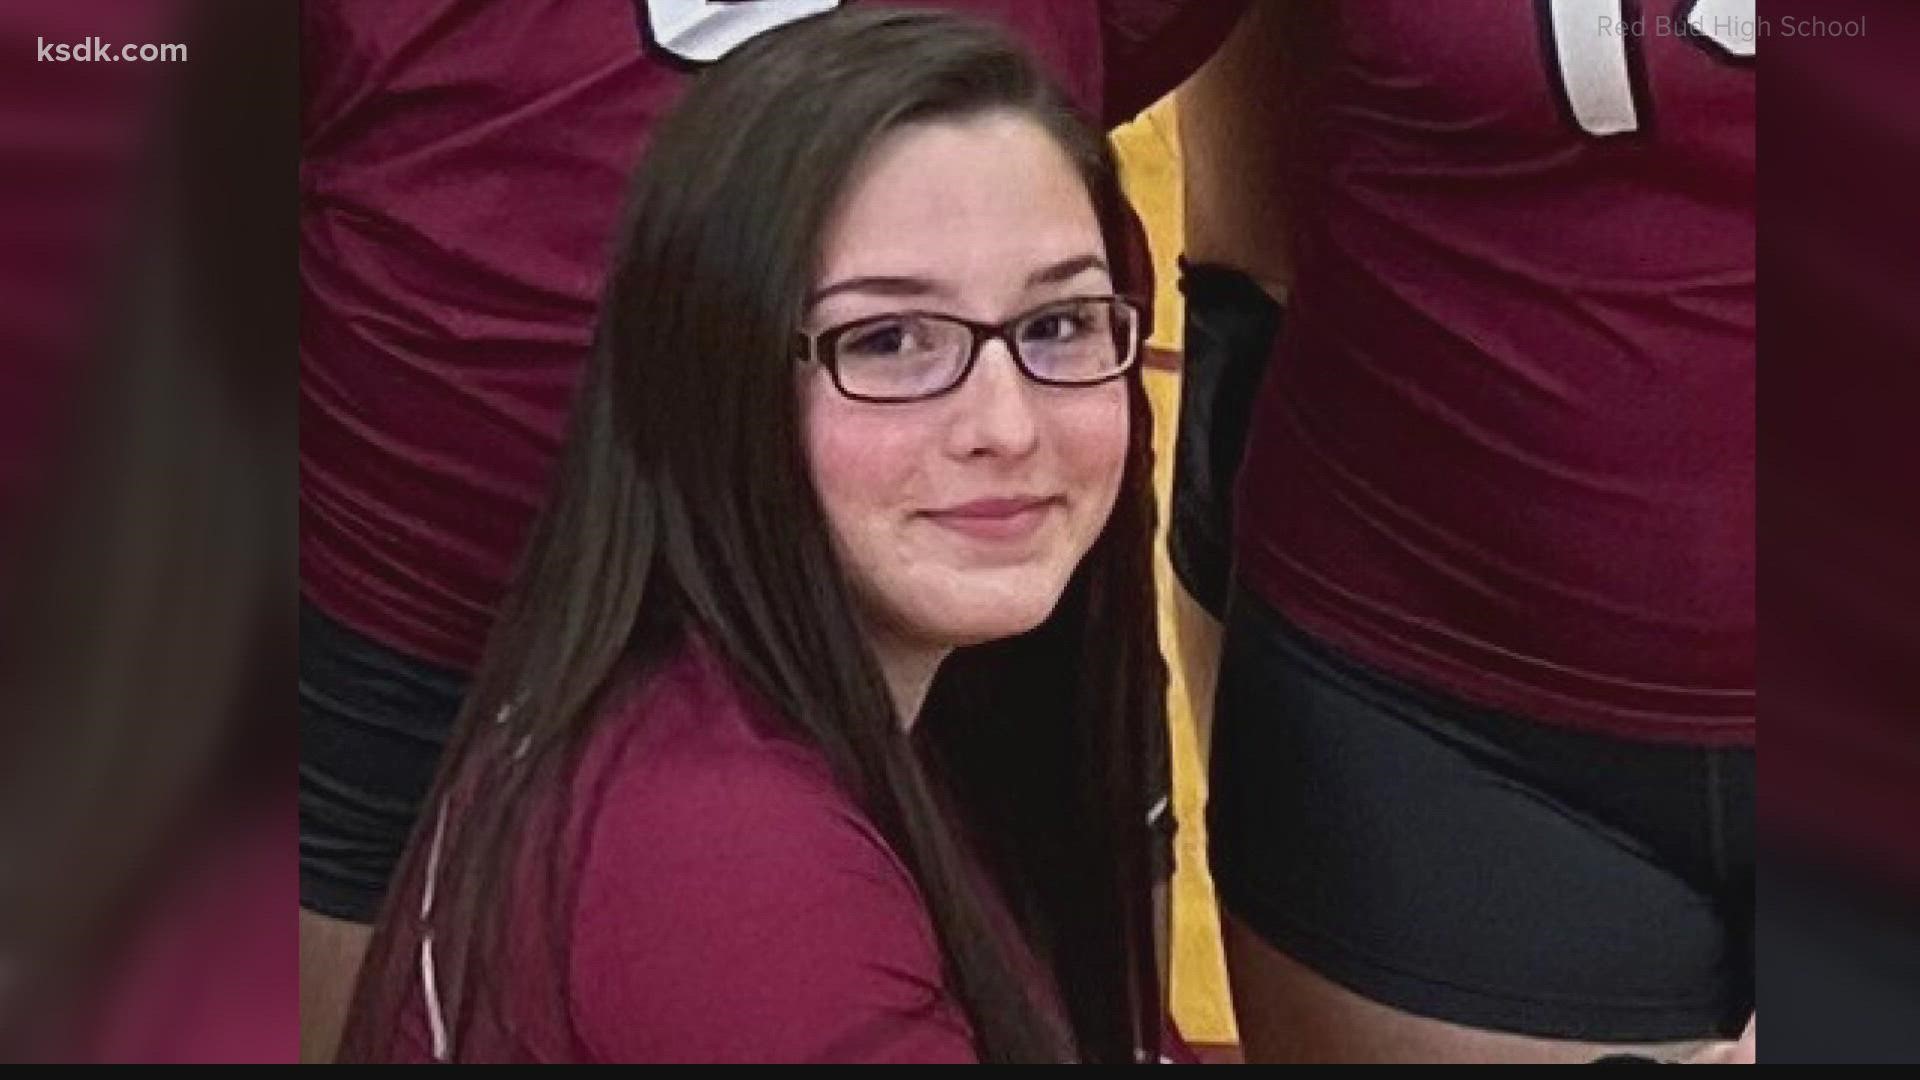 16-year-old Lillian Vandeford was killed after a train hit her car in Randolph Co. Illinois. Her high school educators remember her bubbly personality.